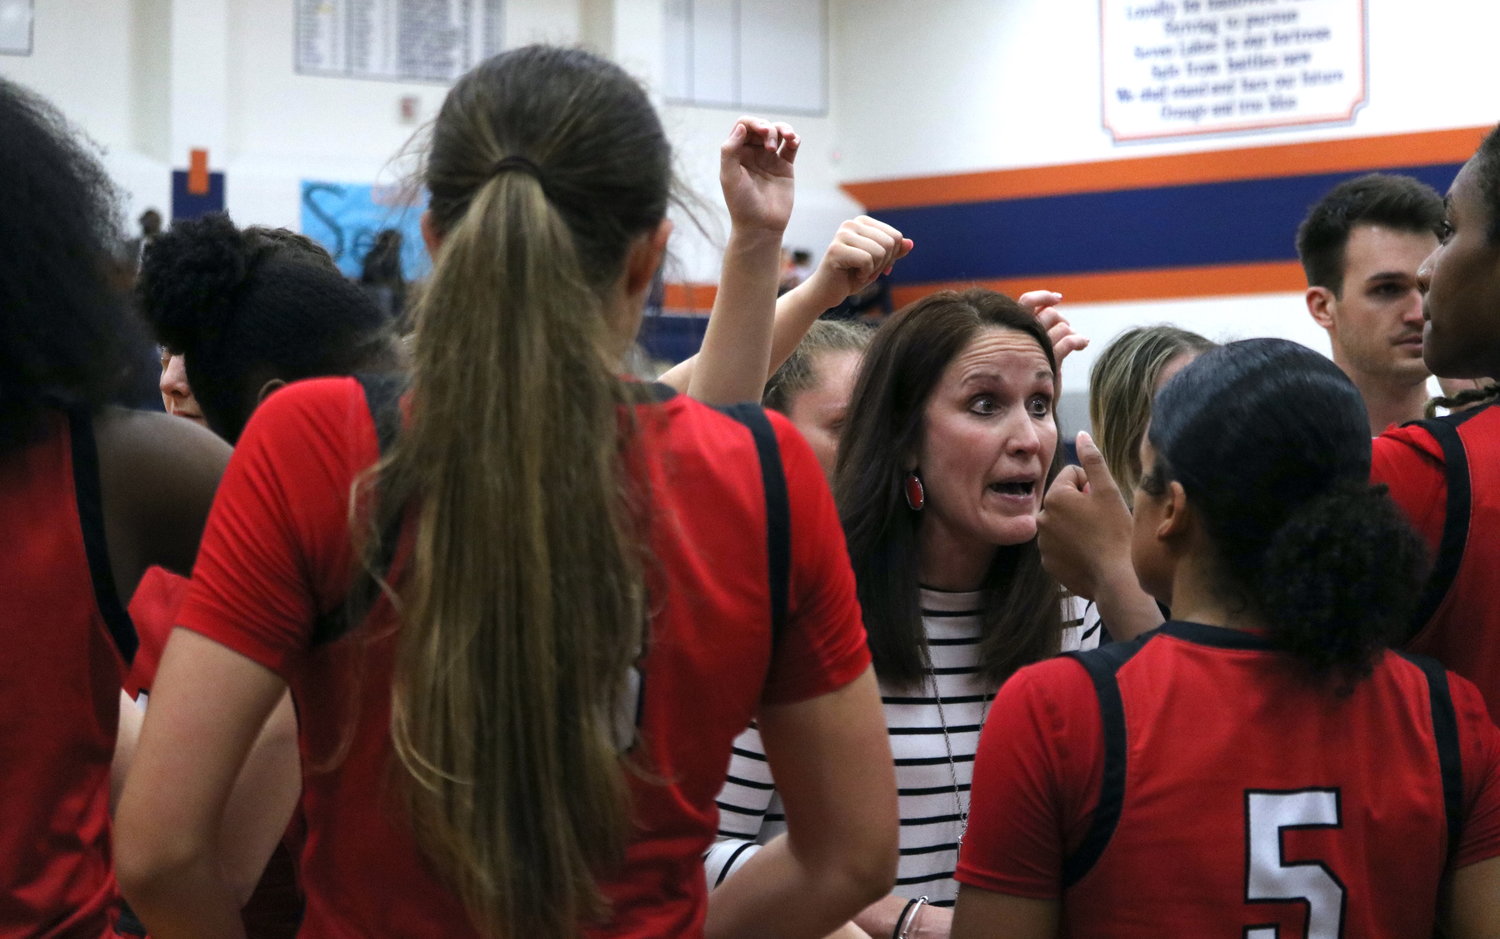 Katy head coach Shanna Marhofer talks to her team in a huddle during Tuesday's game between Katy and Seven Lakes at the Seven Lakes gym.